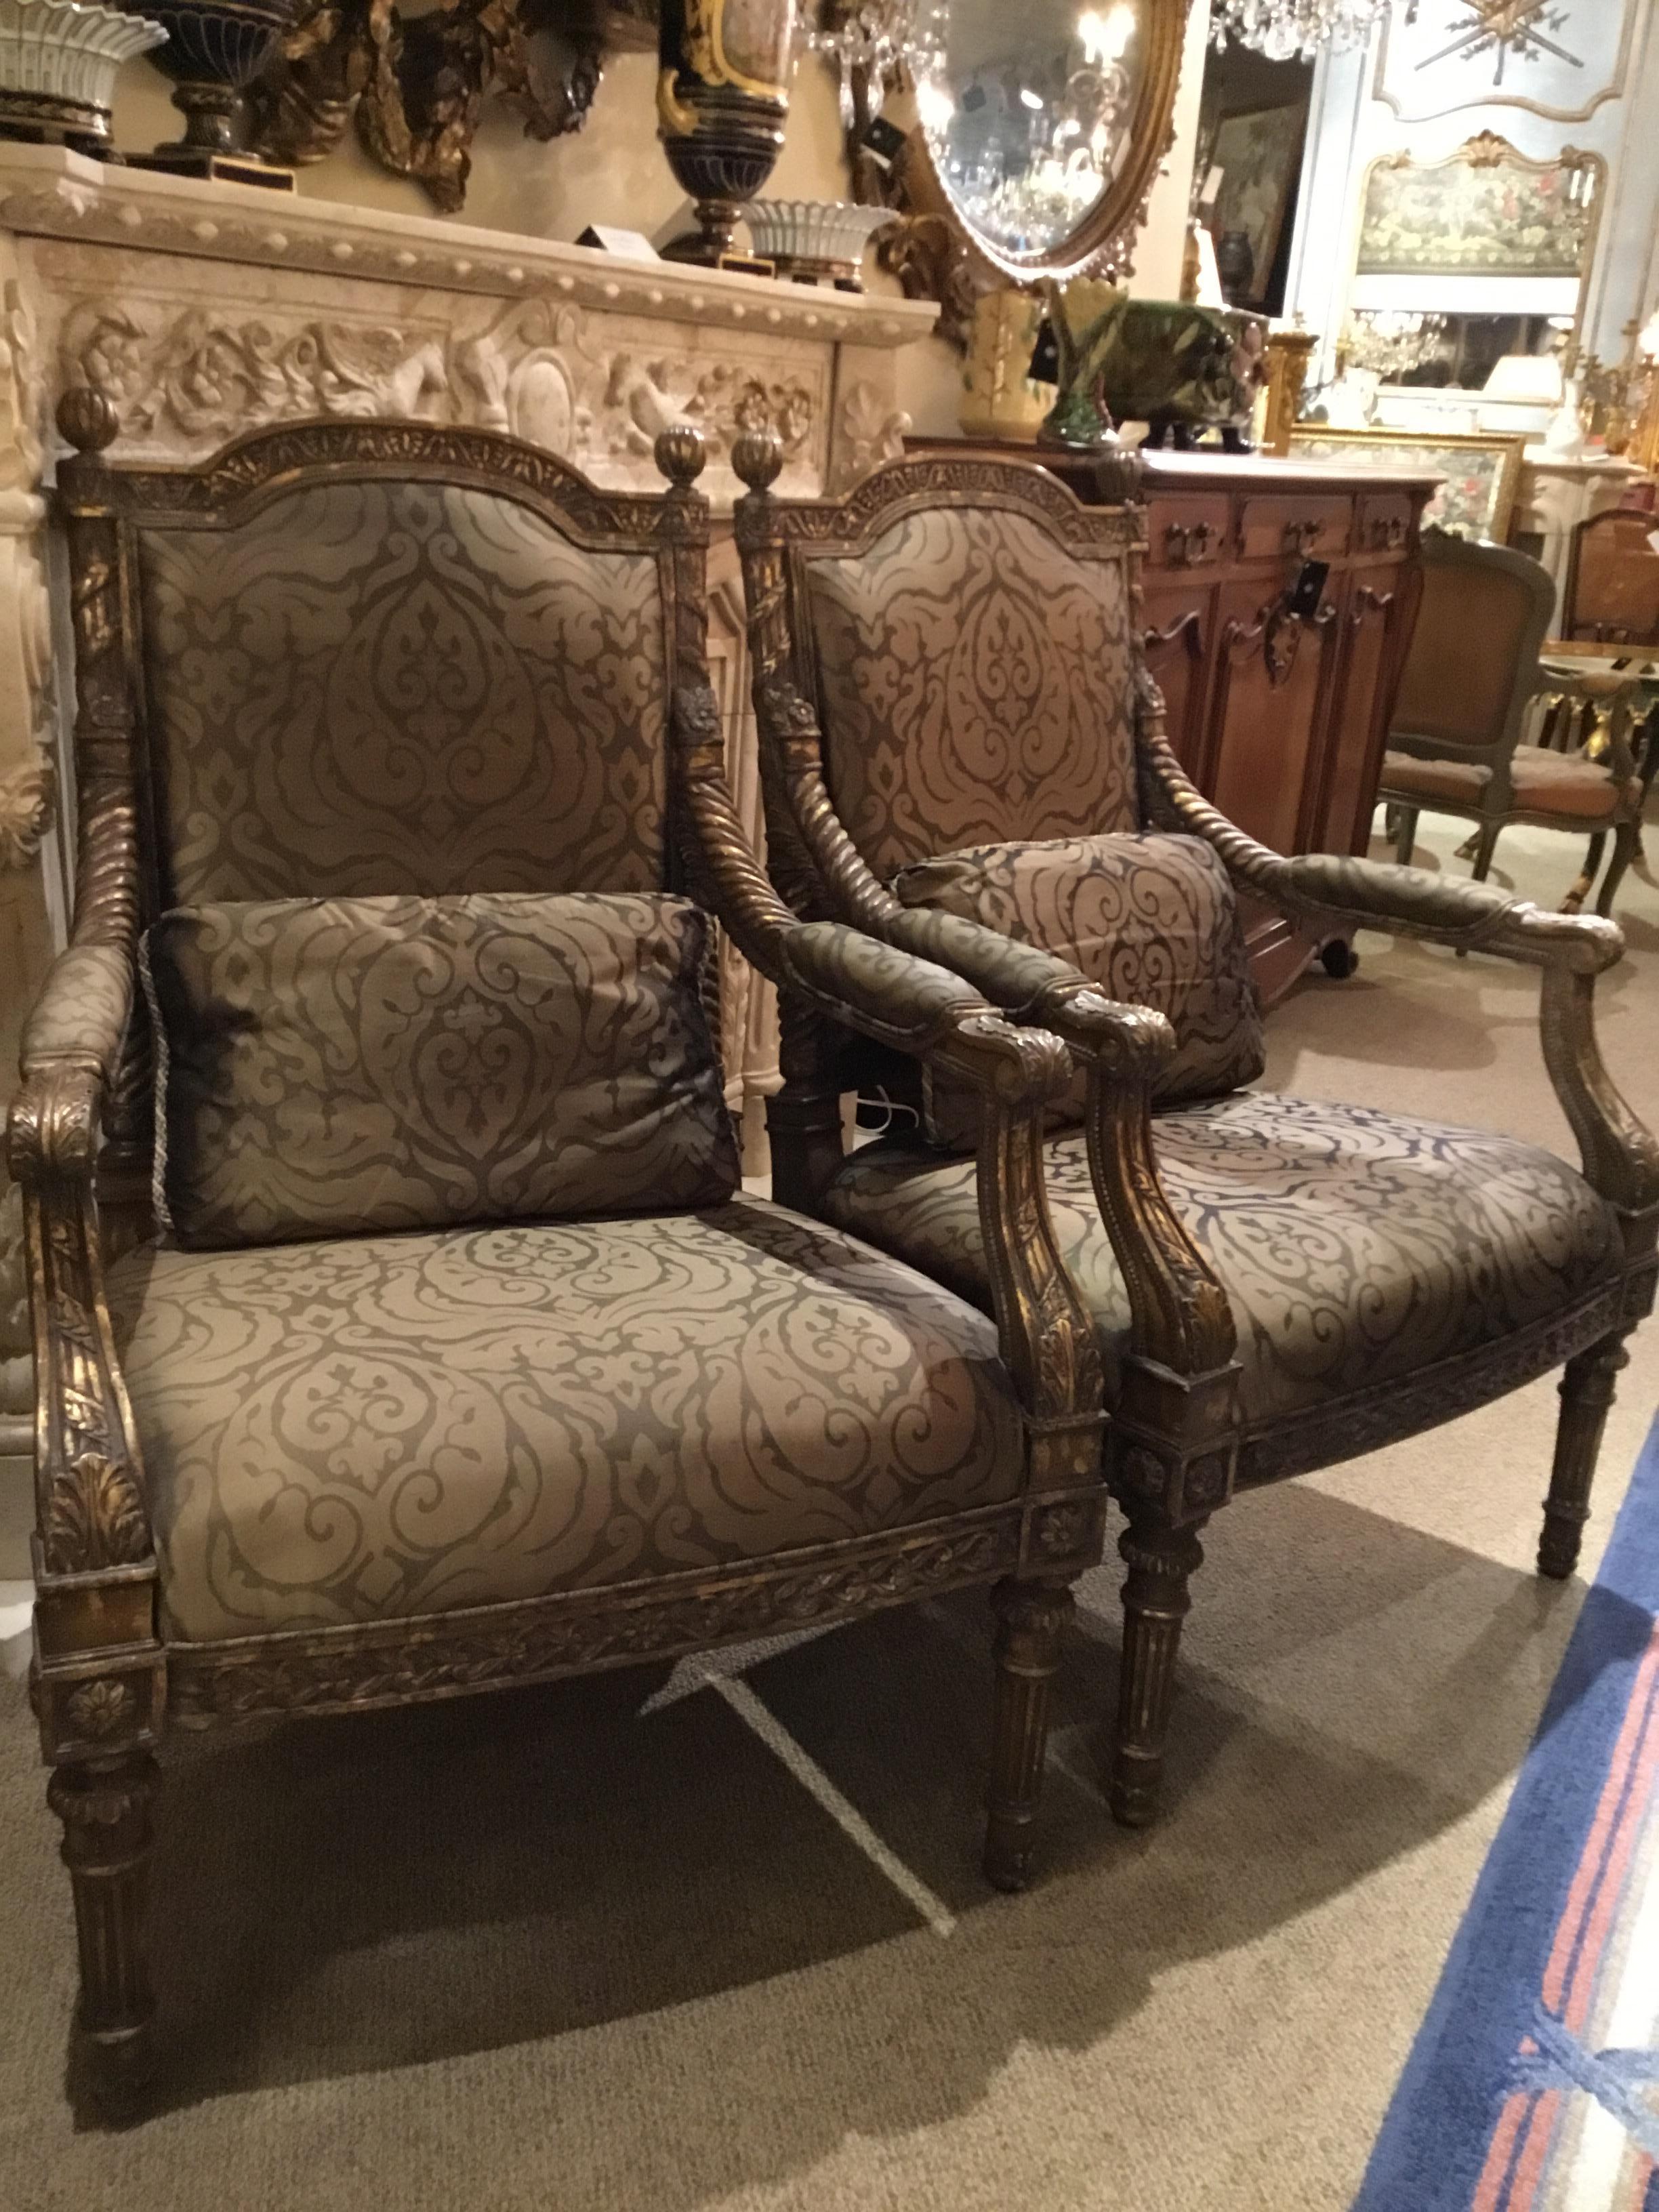 Handsome and comfortable pair of Louis XVI style chairs with a faux
gilt finish. Having a reeded leg and dome shaped seat back.
Two cushions come with this set.